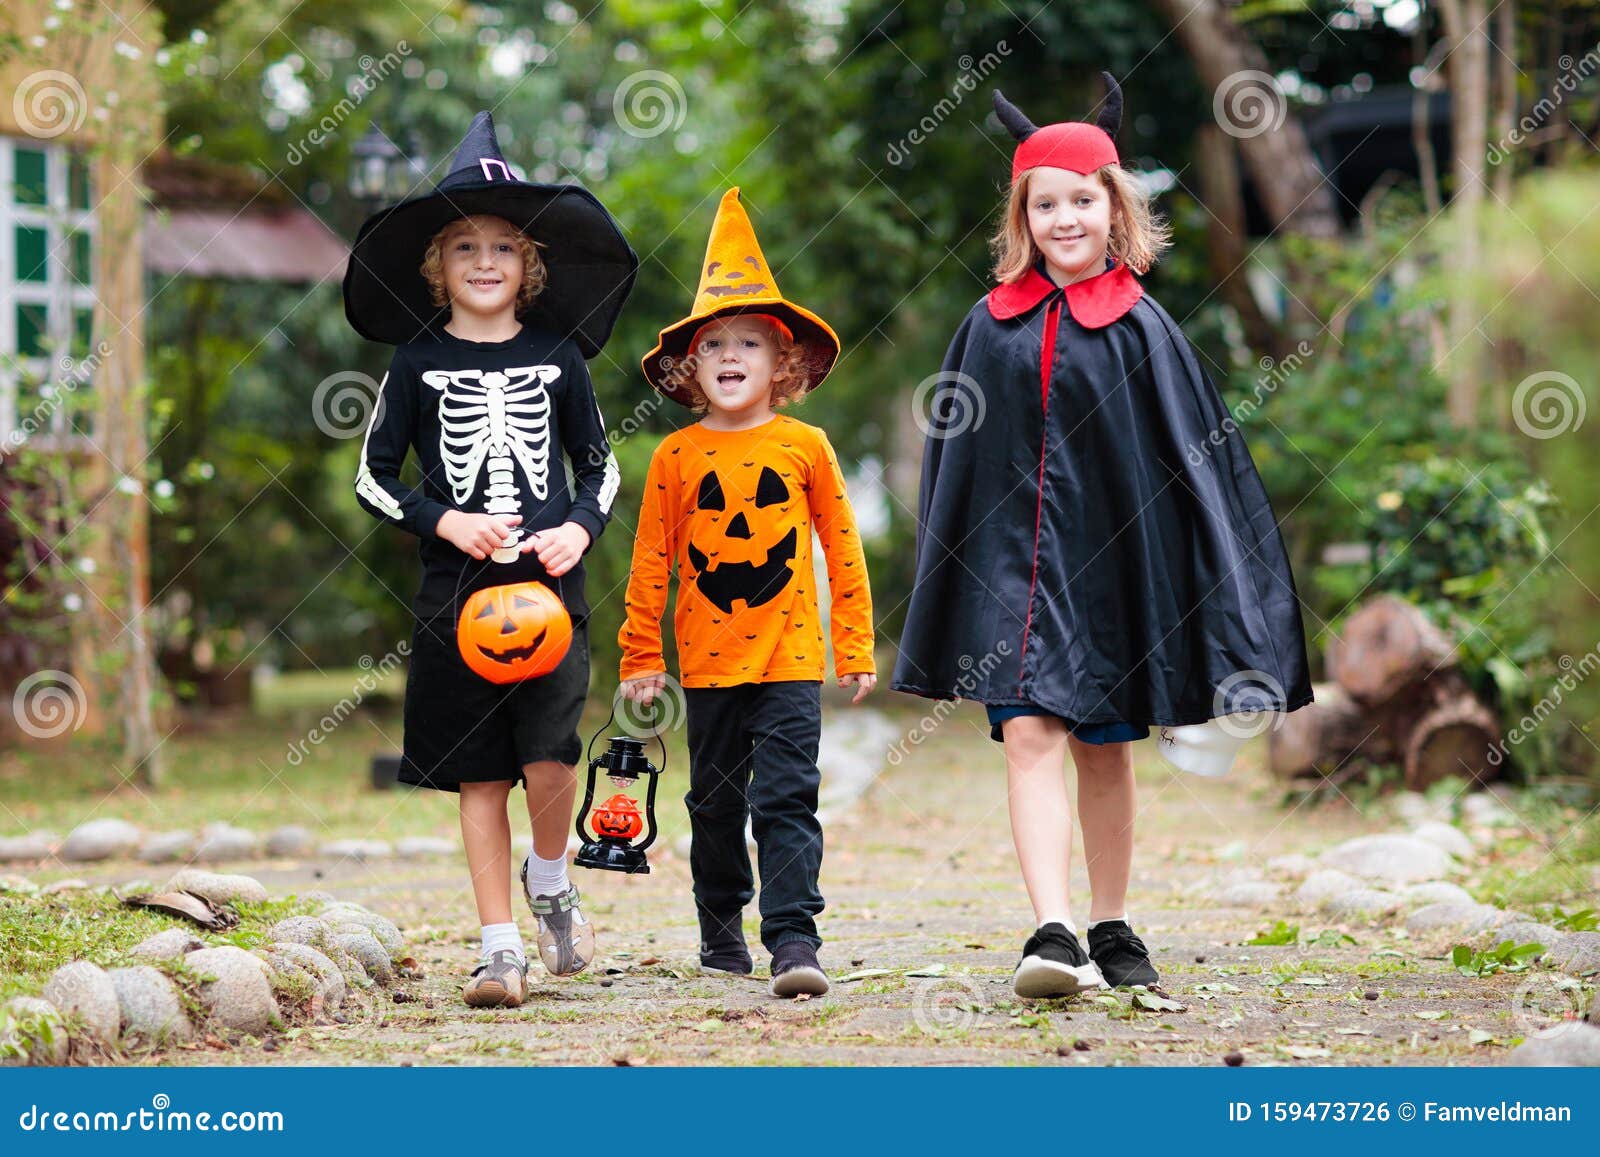 Kids Trick or Treat. Halloween Fun for Children Stock Photo - Image of  candy, outdoors: 159473726